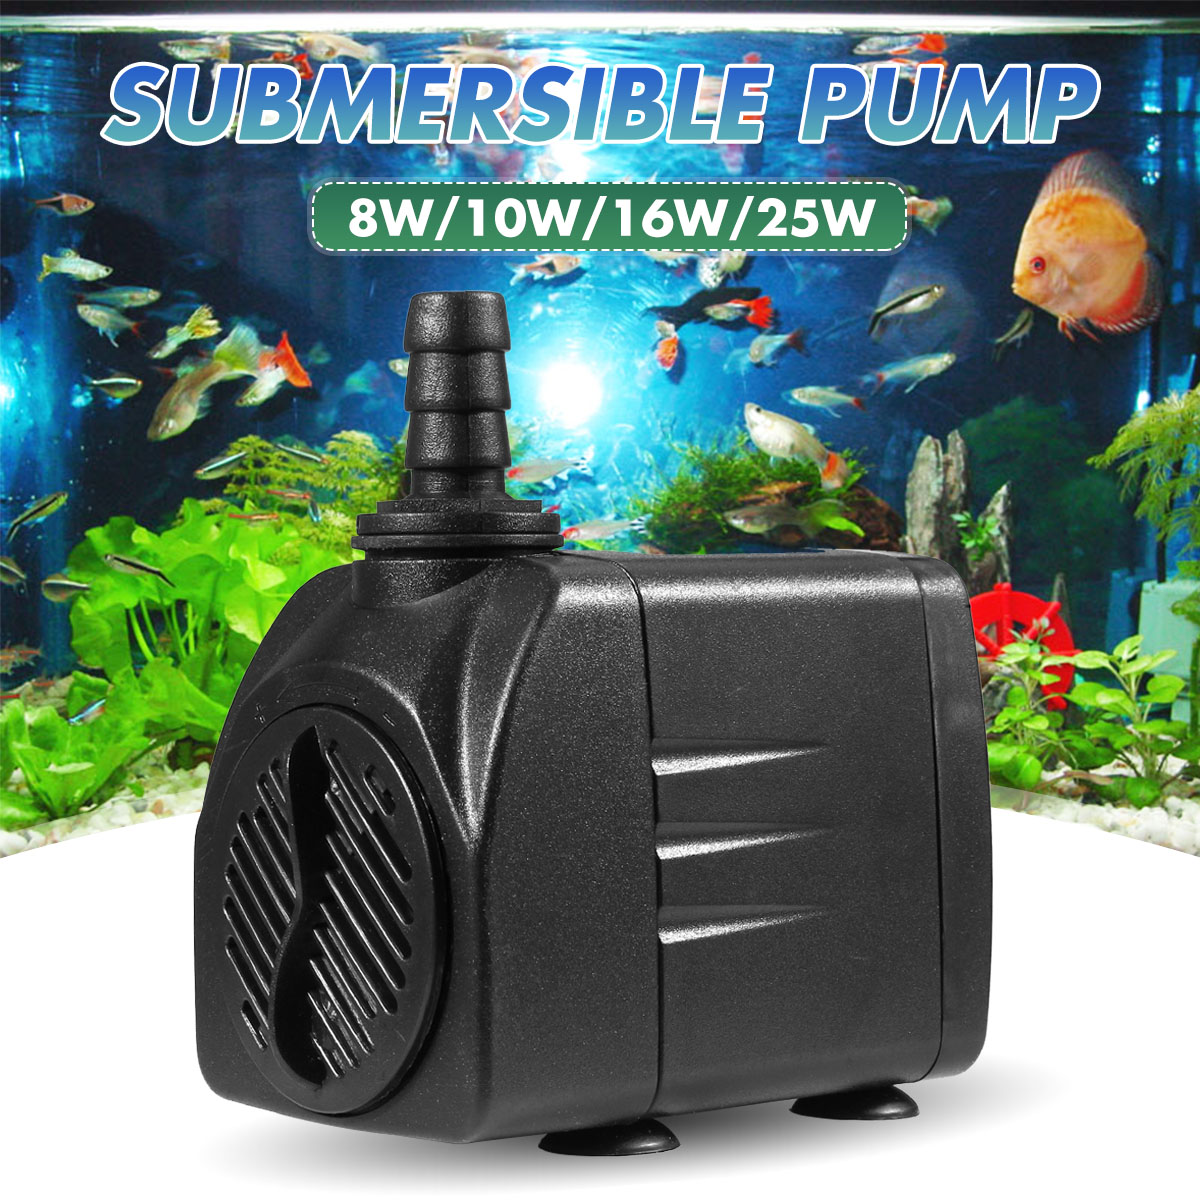 8-25W-Submersible-Water-Pump-Oxygen-Pump-Electric-Water-Feature-Pump-Small-Fountain-Garden-Fish-Pond-1541724-1